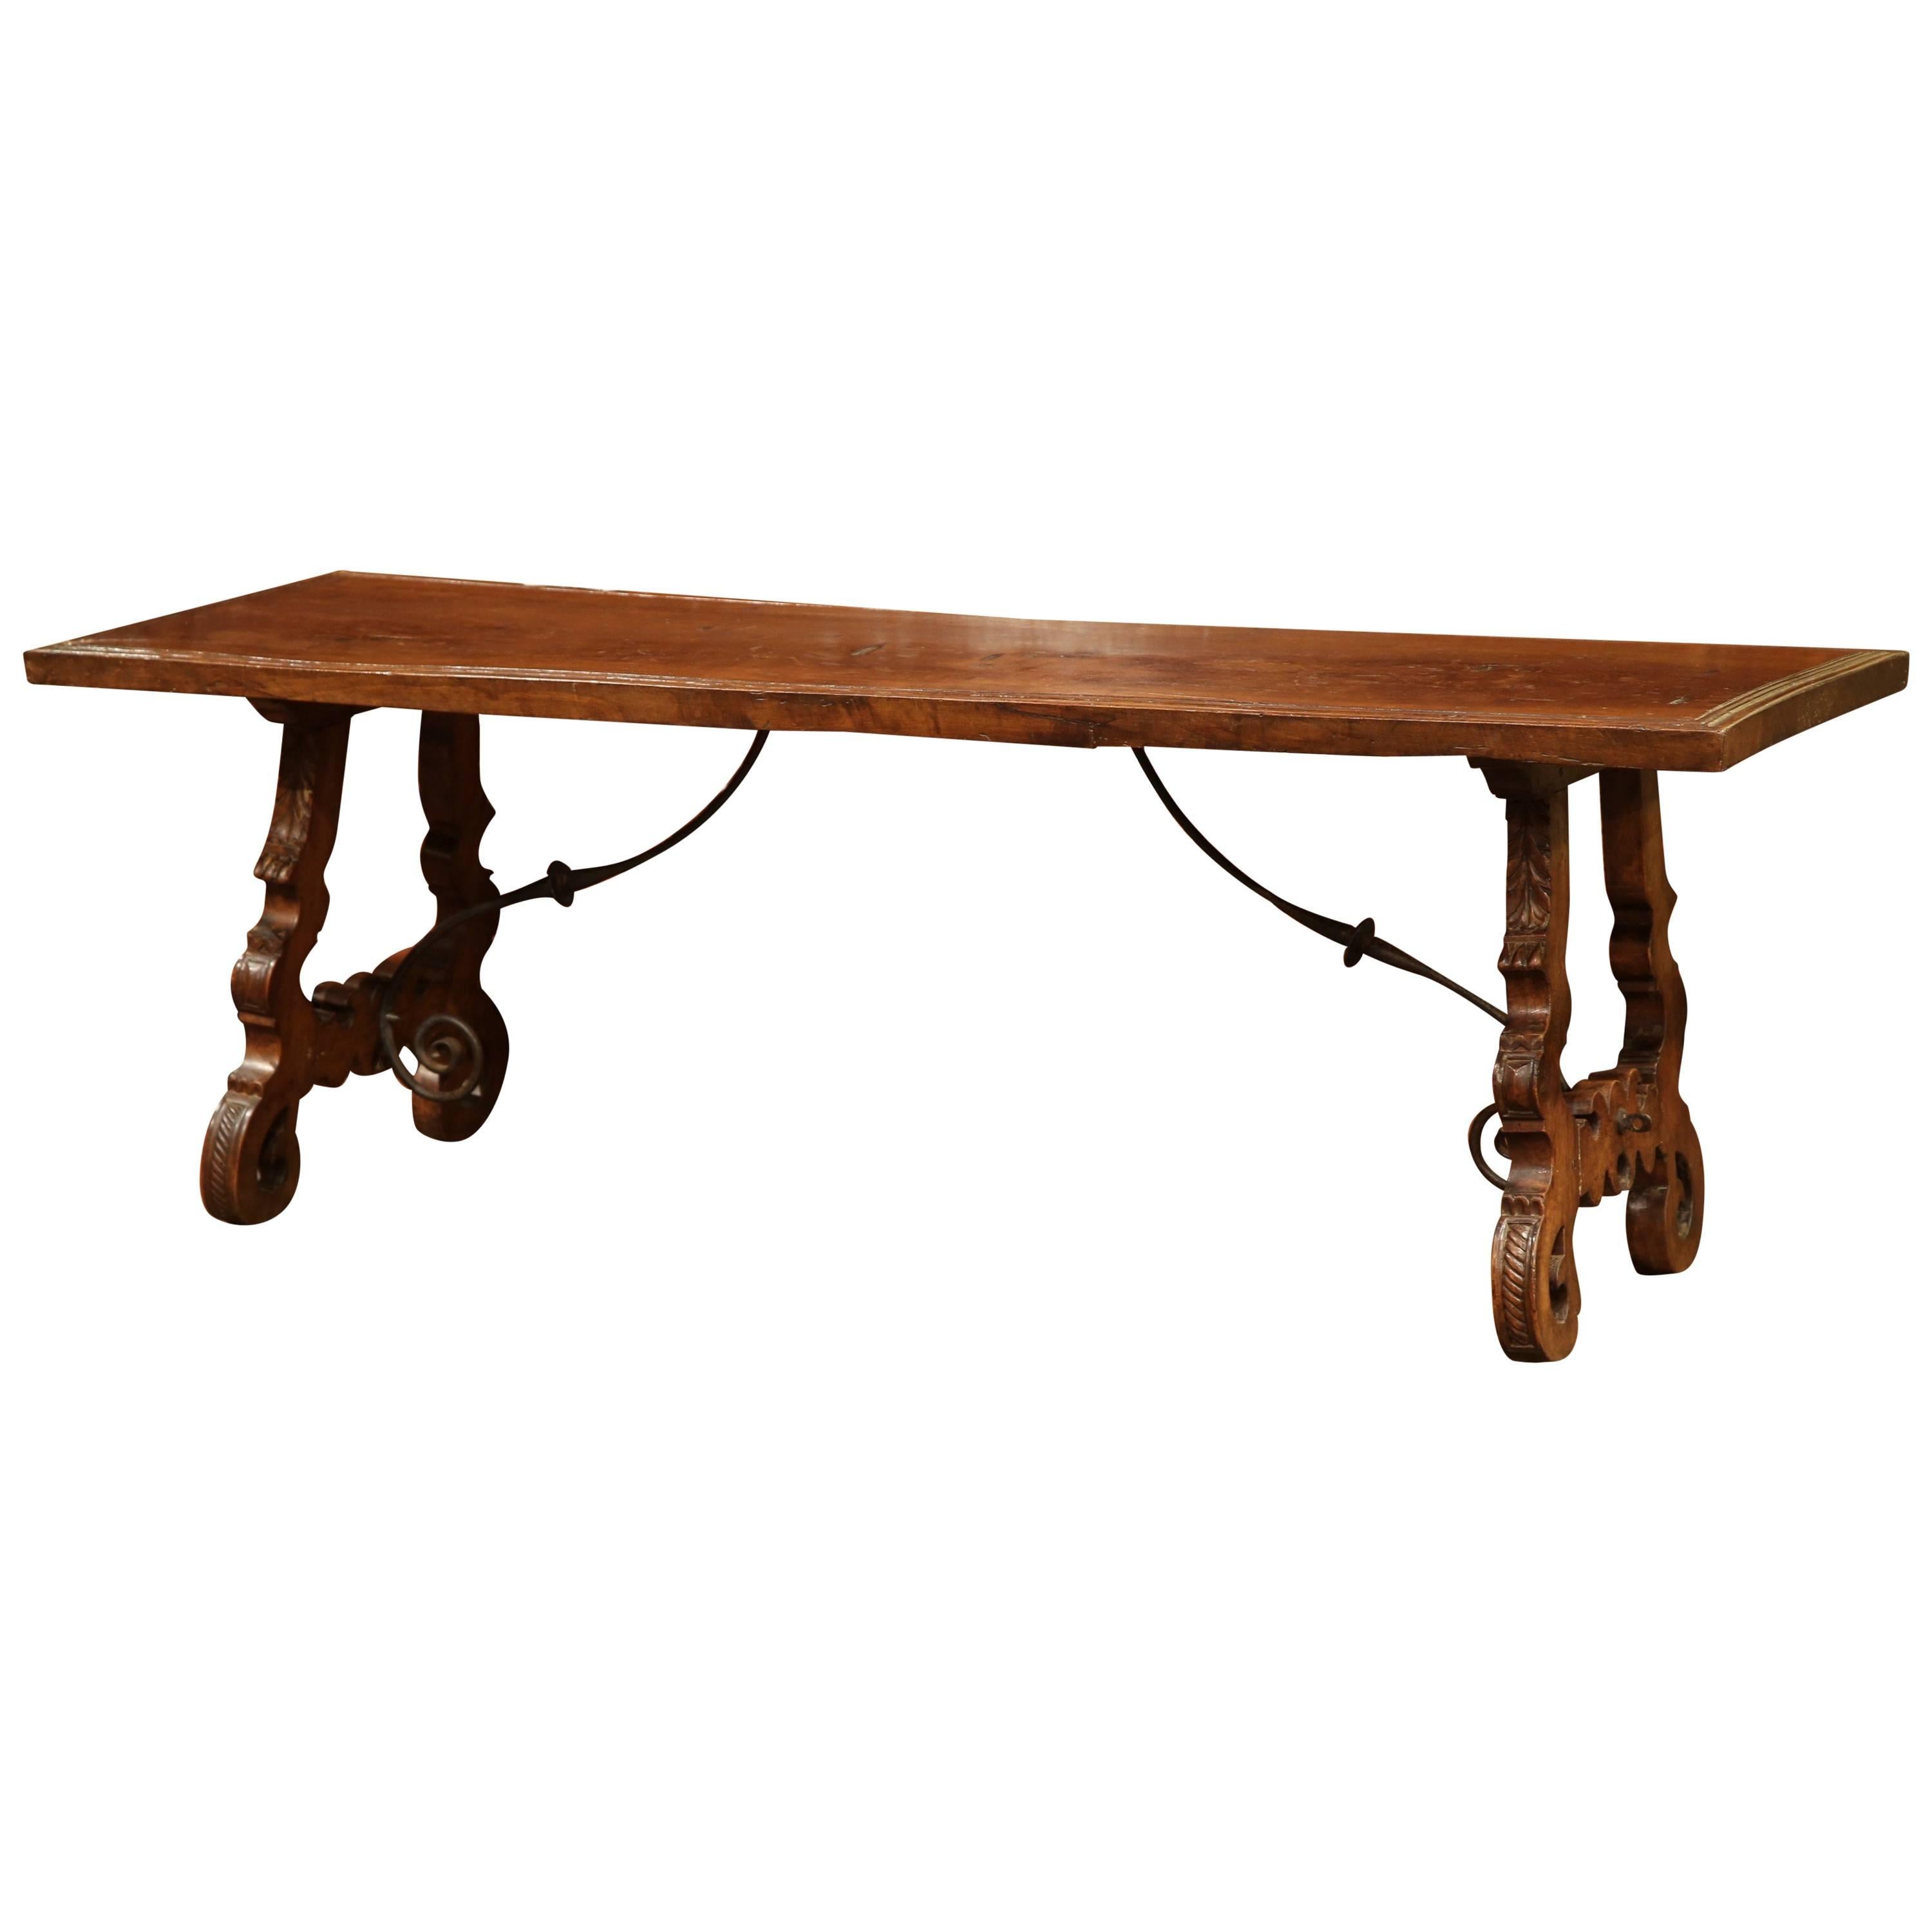 Early 19th Century Spanish Carved Walnut Coffee Table with Iron Stretcher